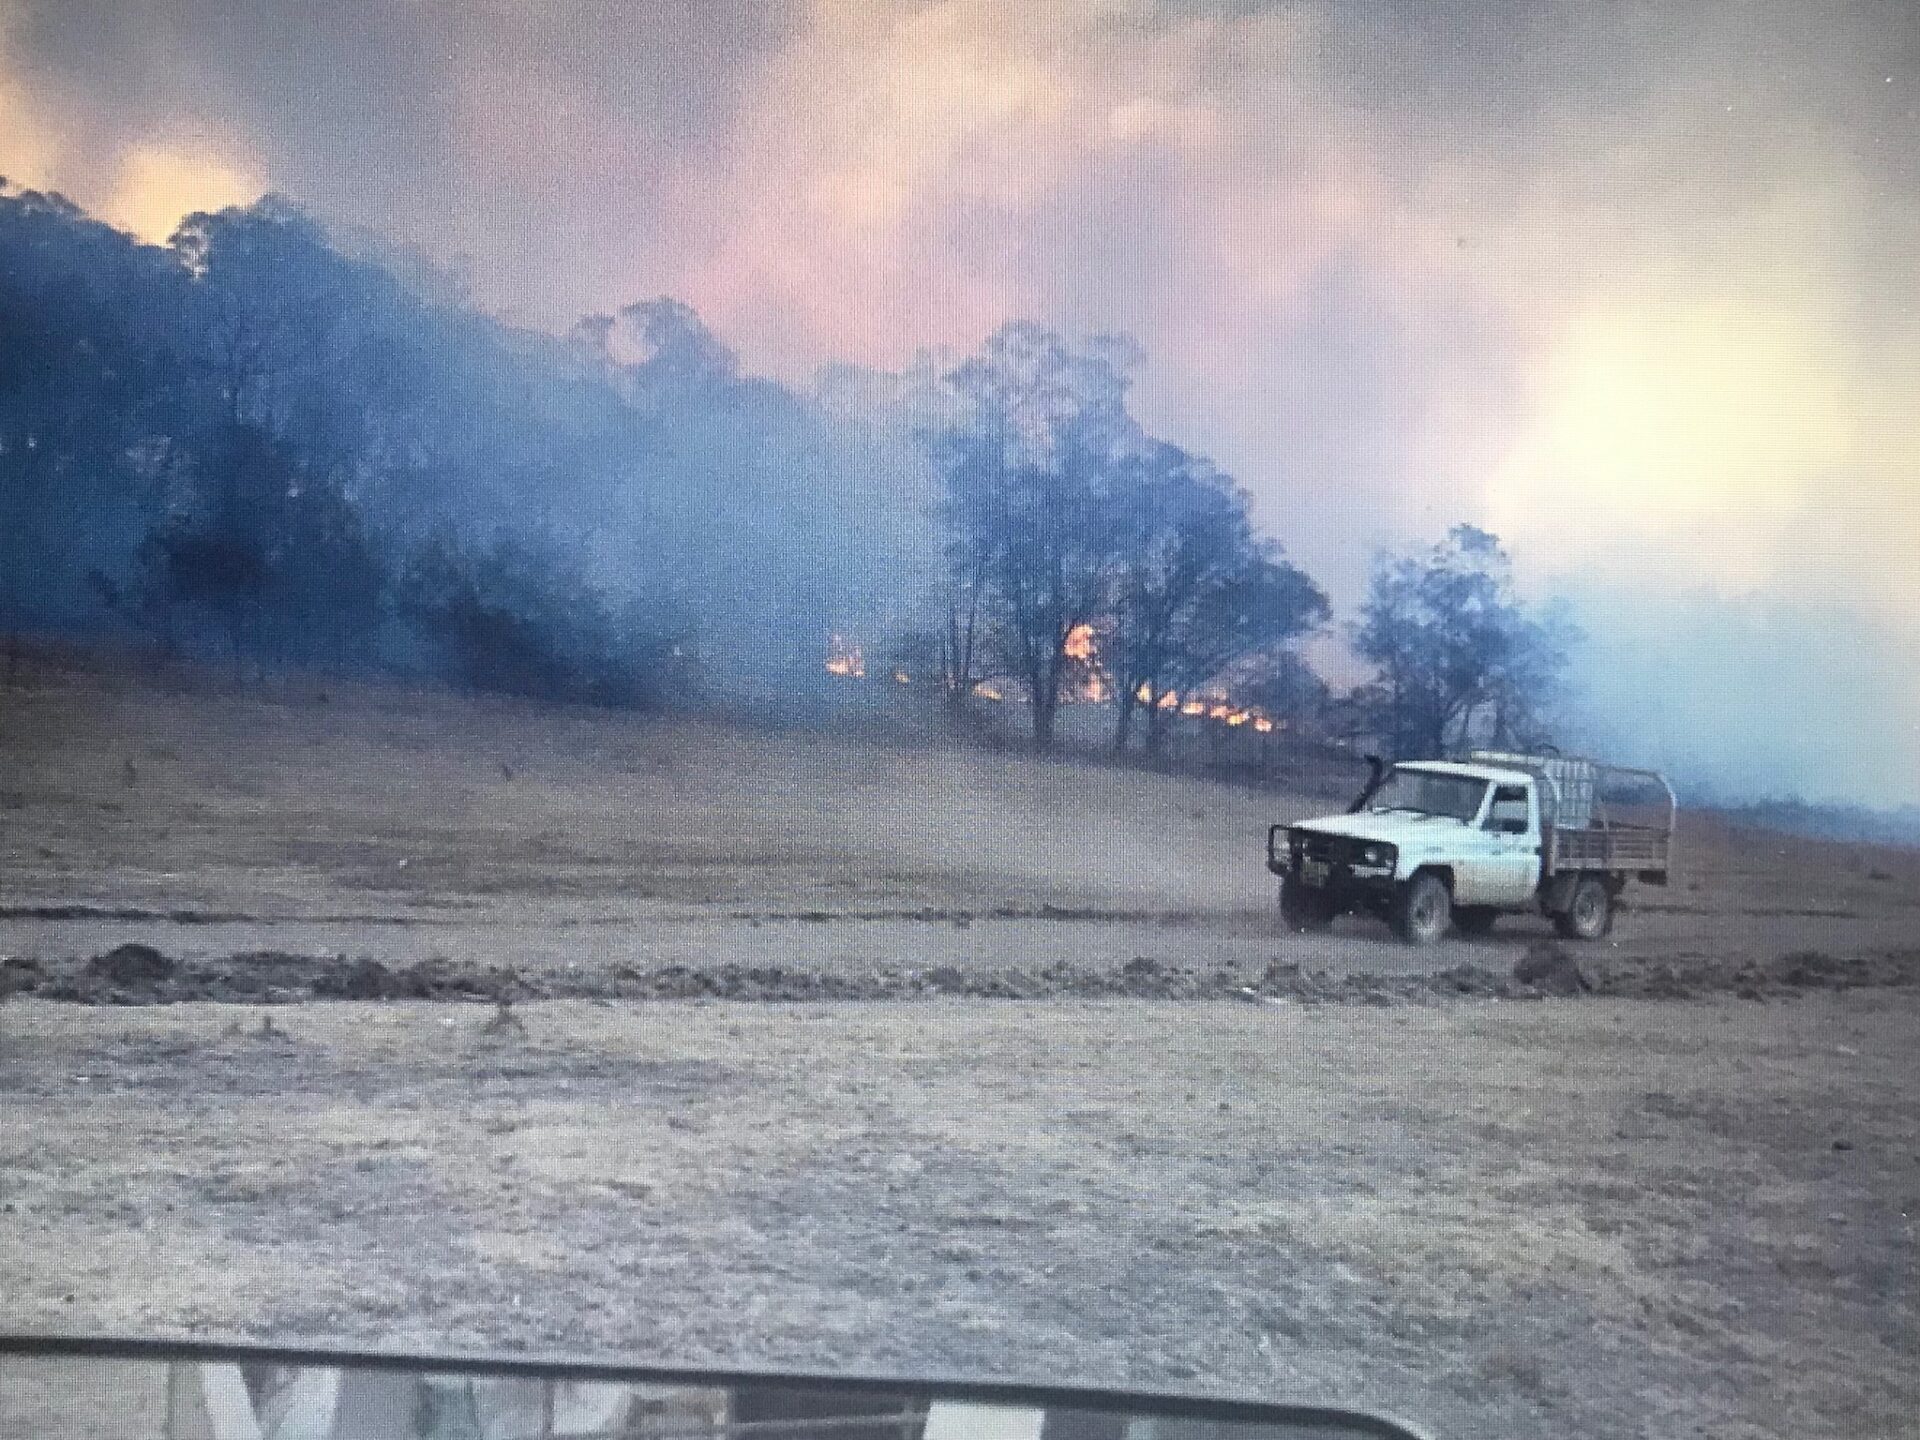 a smoke plume over trees in a paddock with a ute parked in the foreground